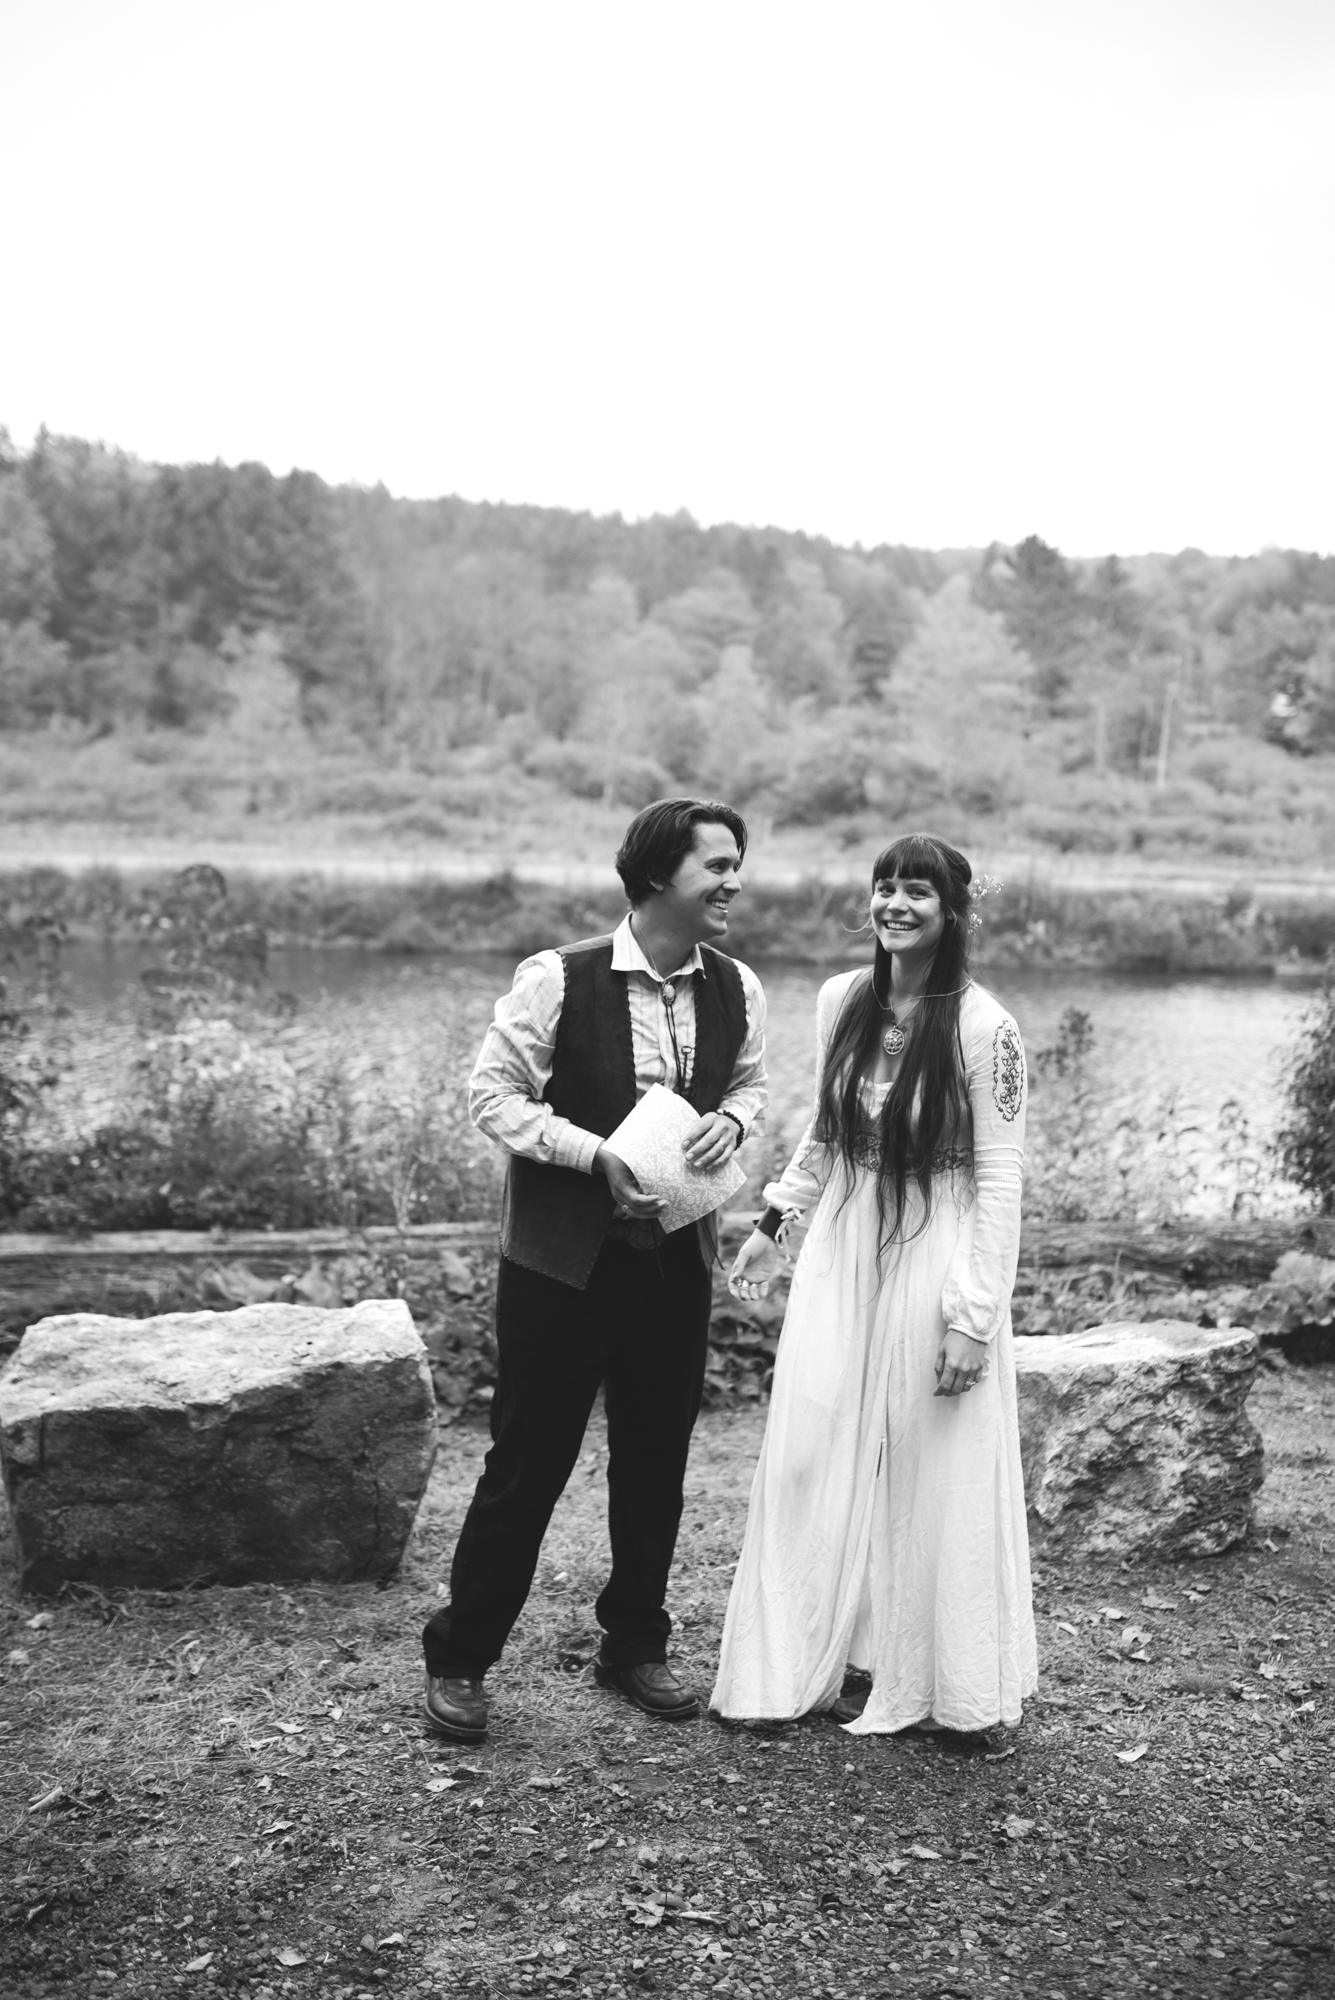  Mountain Wedding, Outdoors, Rustic, West Virginia, Maryland Wedding Photographer, DIY, Casual, Bride and groom laughing together, just married, black and white photo 